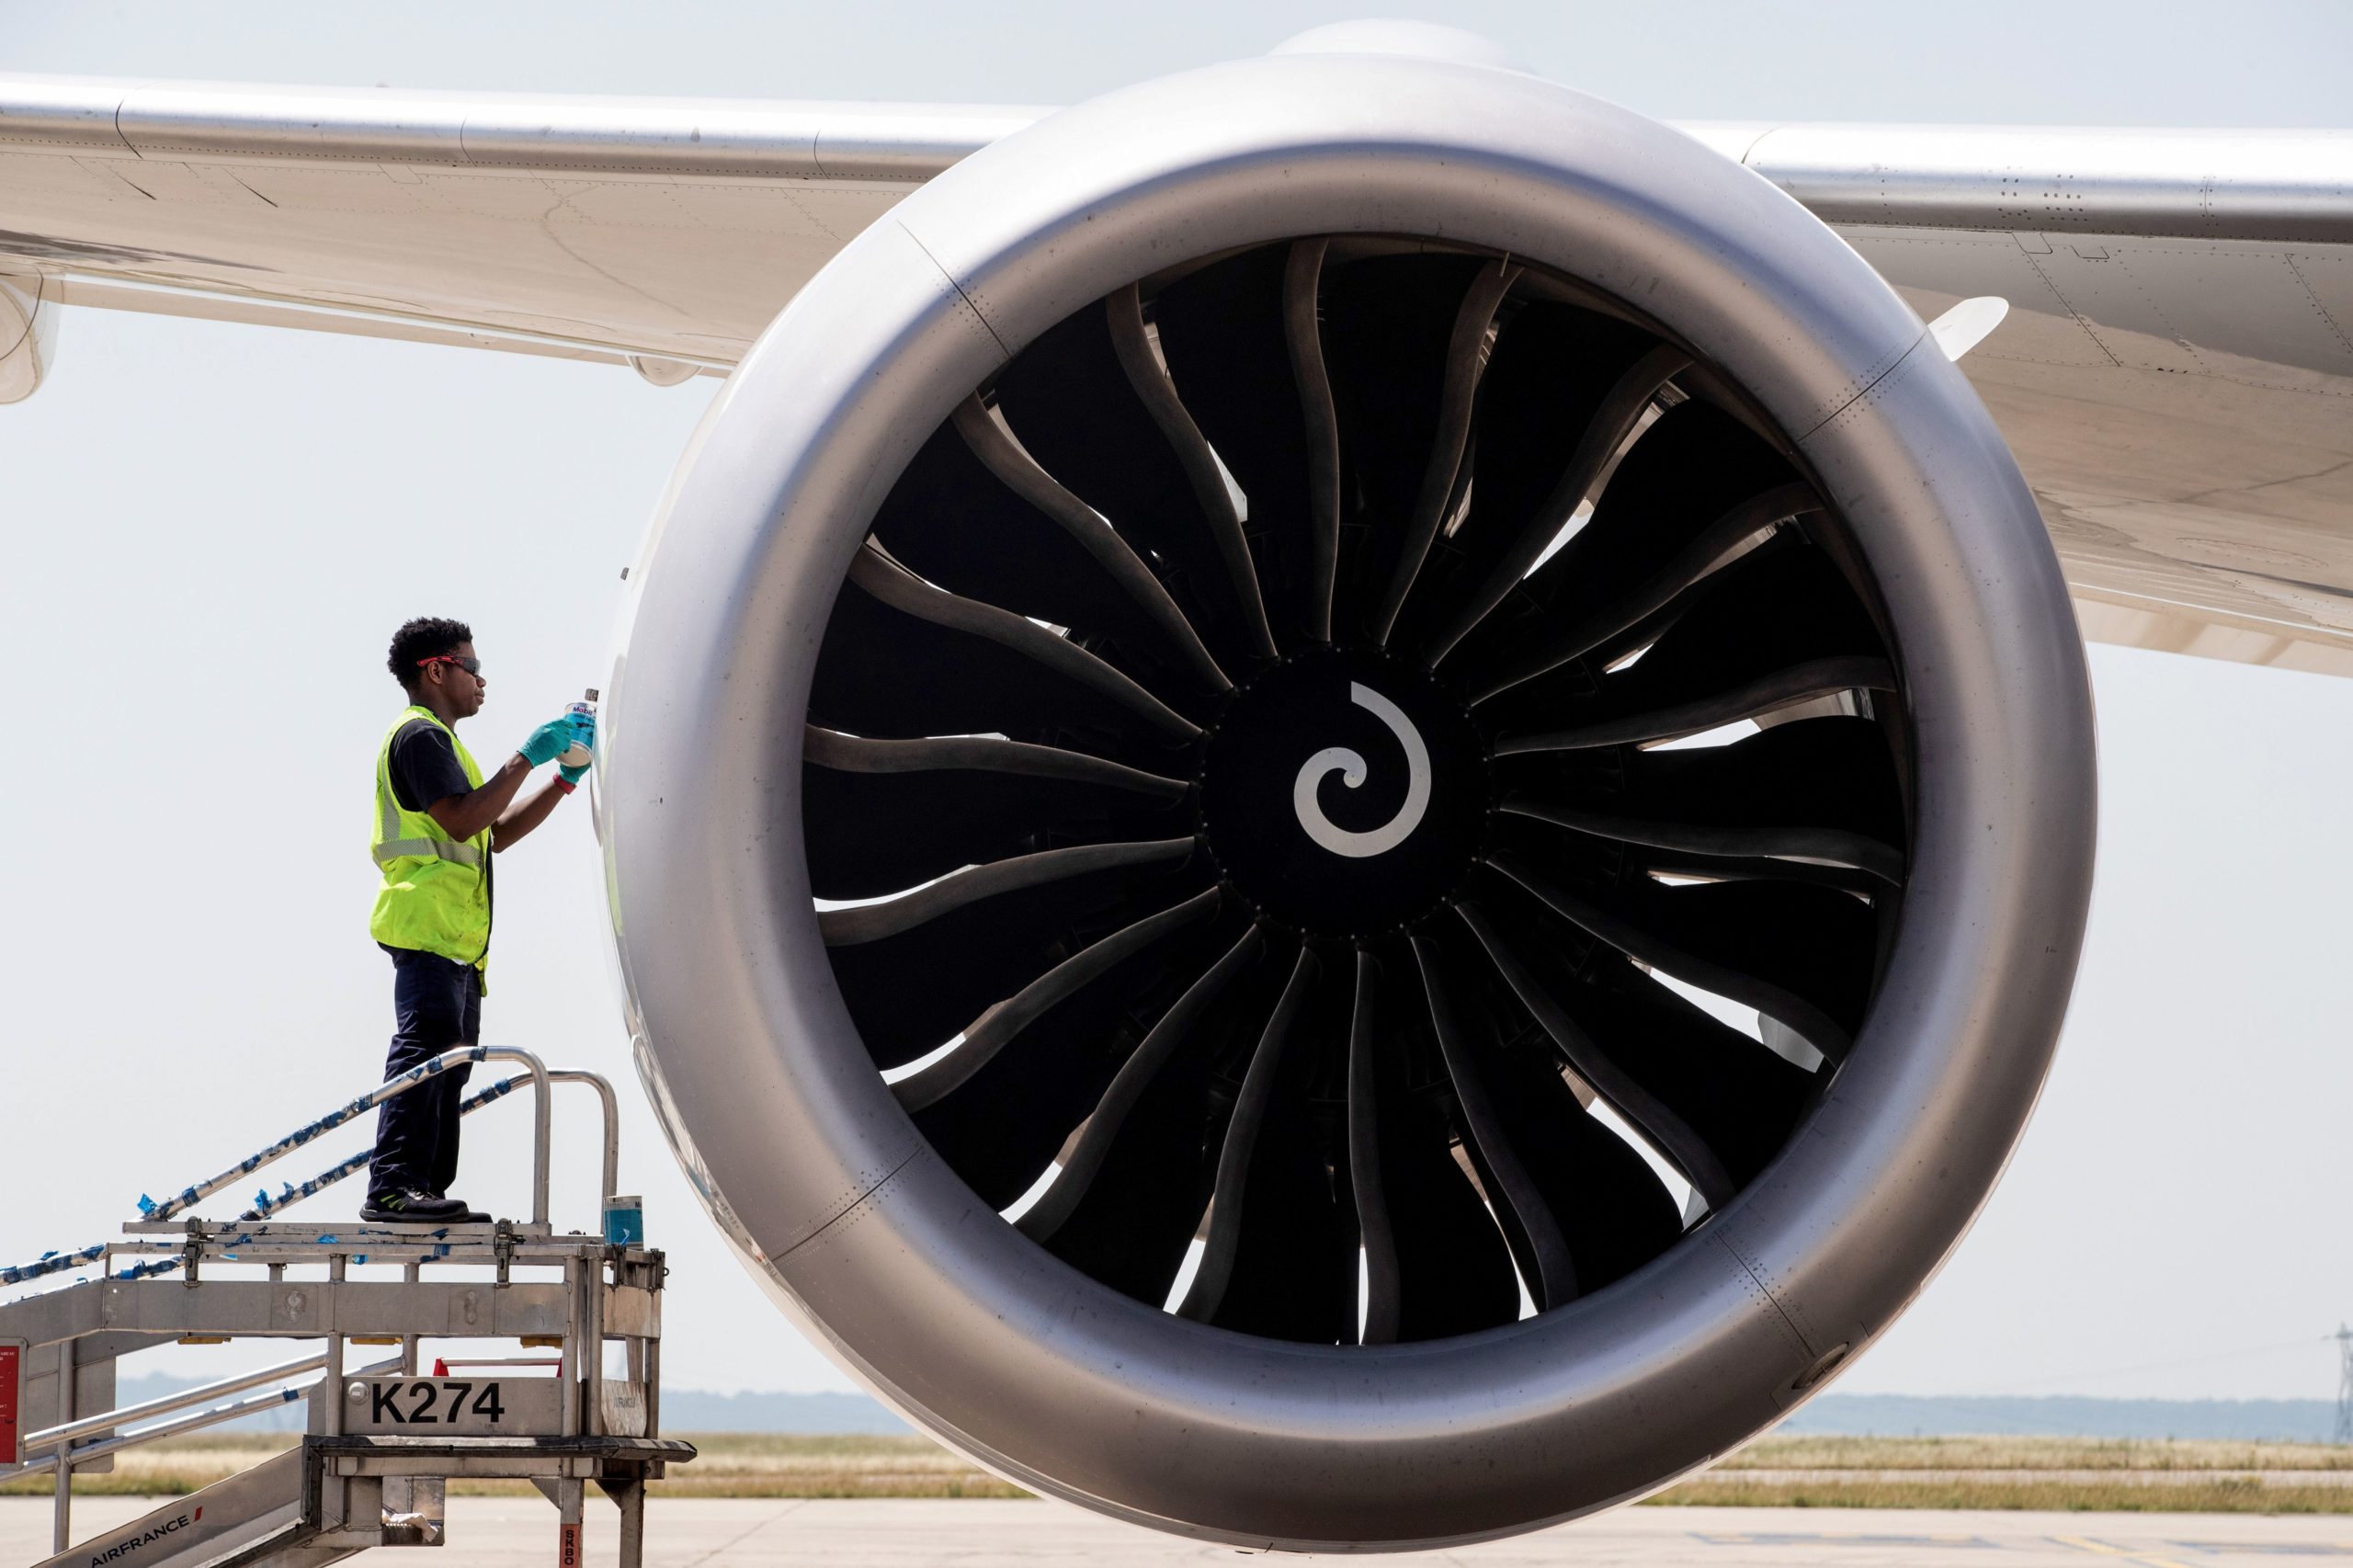 An airport worker checks the engine of a Boeing 787 of the airline company Air France parked in the tarmac at Roissy-Charles de Gaulle Airport, in Roissy, north of Paris, on June 27, 2019. (Photo by JOEL SAGET / AFP) (Photo credit should read JOEL SAGET/AFP via Getty Images)